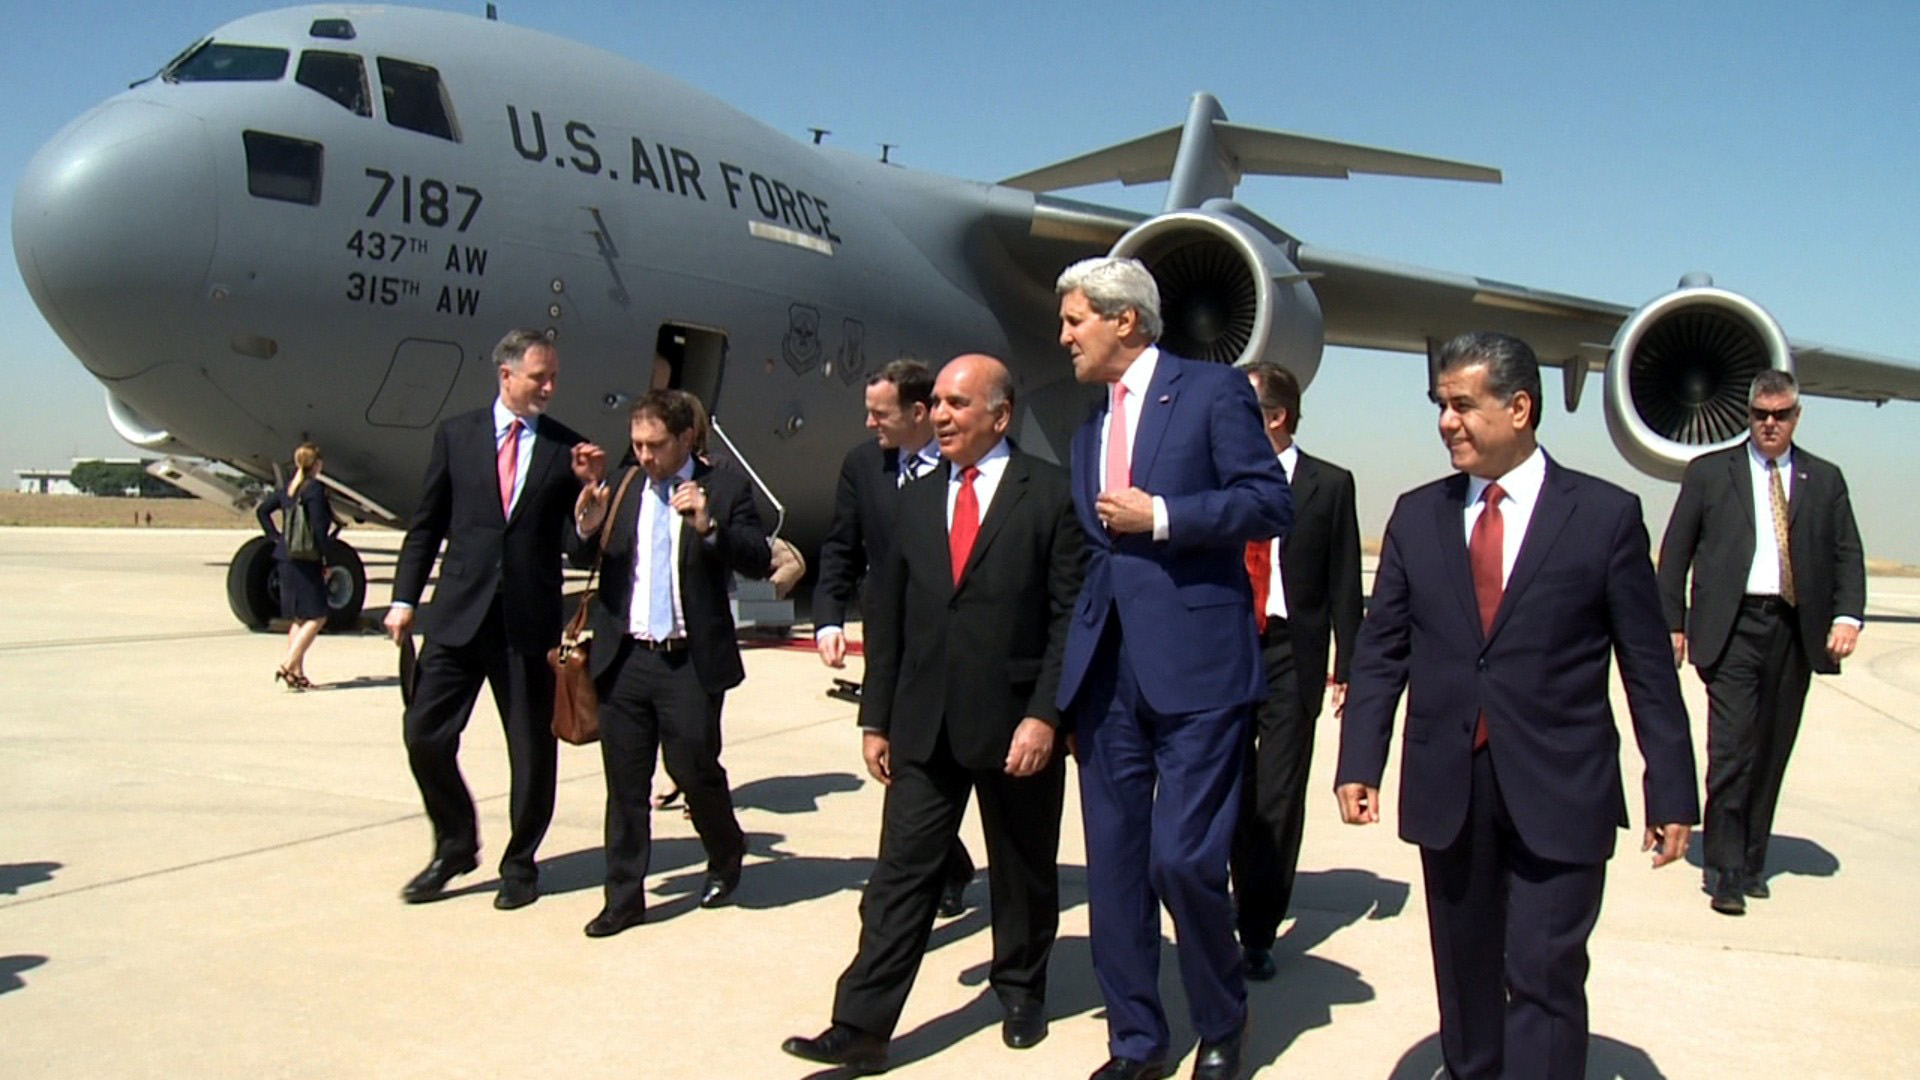 US Secretary of State John Kerry arrives in Erbil,  Iraq on June 24, 2014. (Hamit Husein—Anadolu Agency/Getty Images)